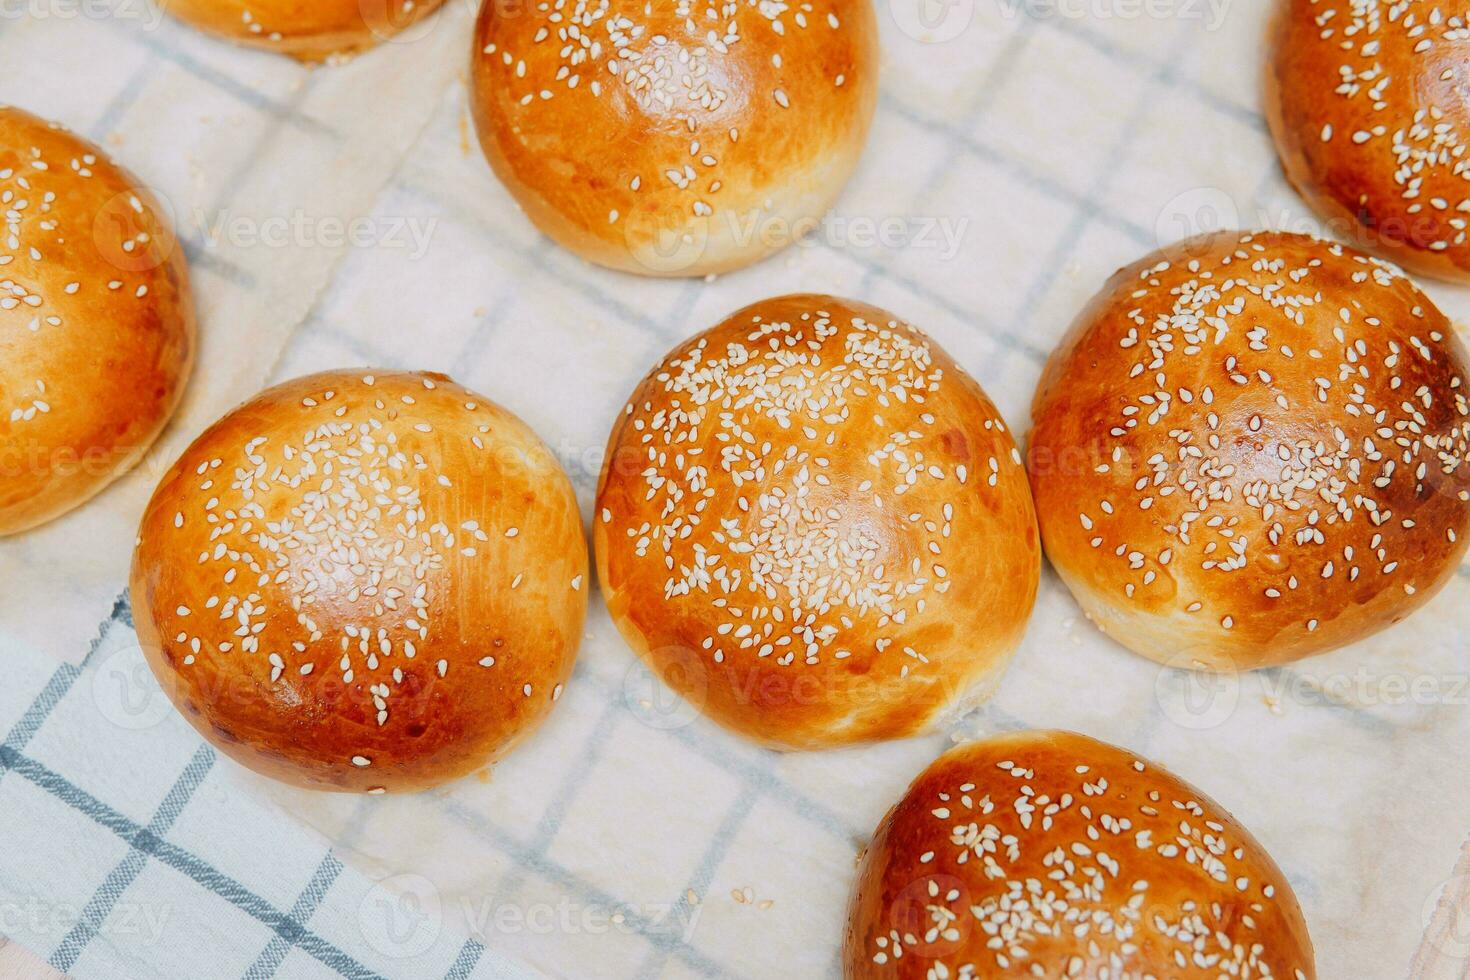 Freshly baked burger buns with sesame seeds. We cook at home. photo